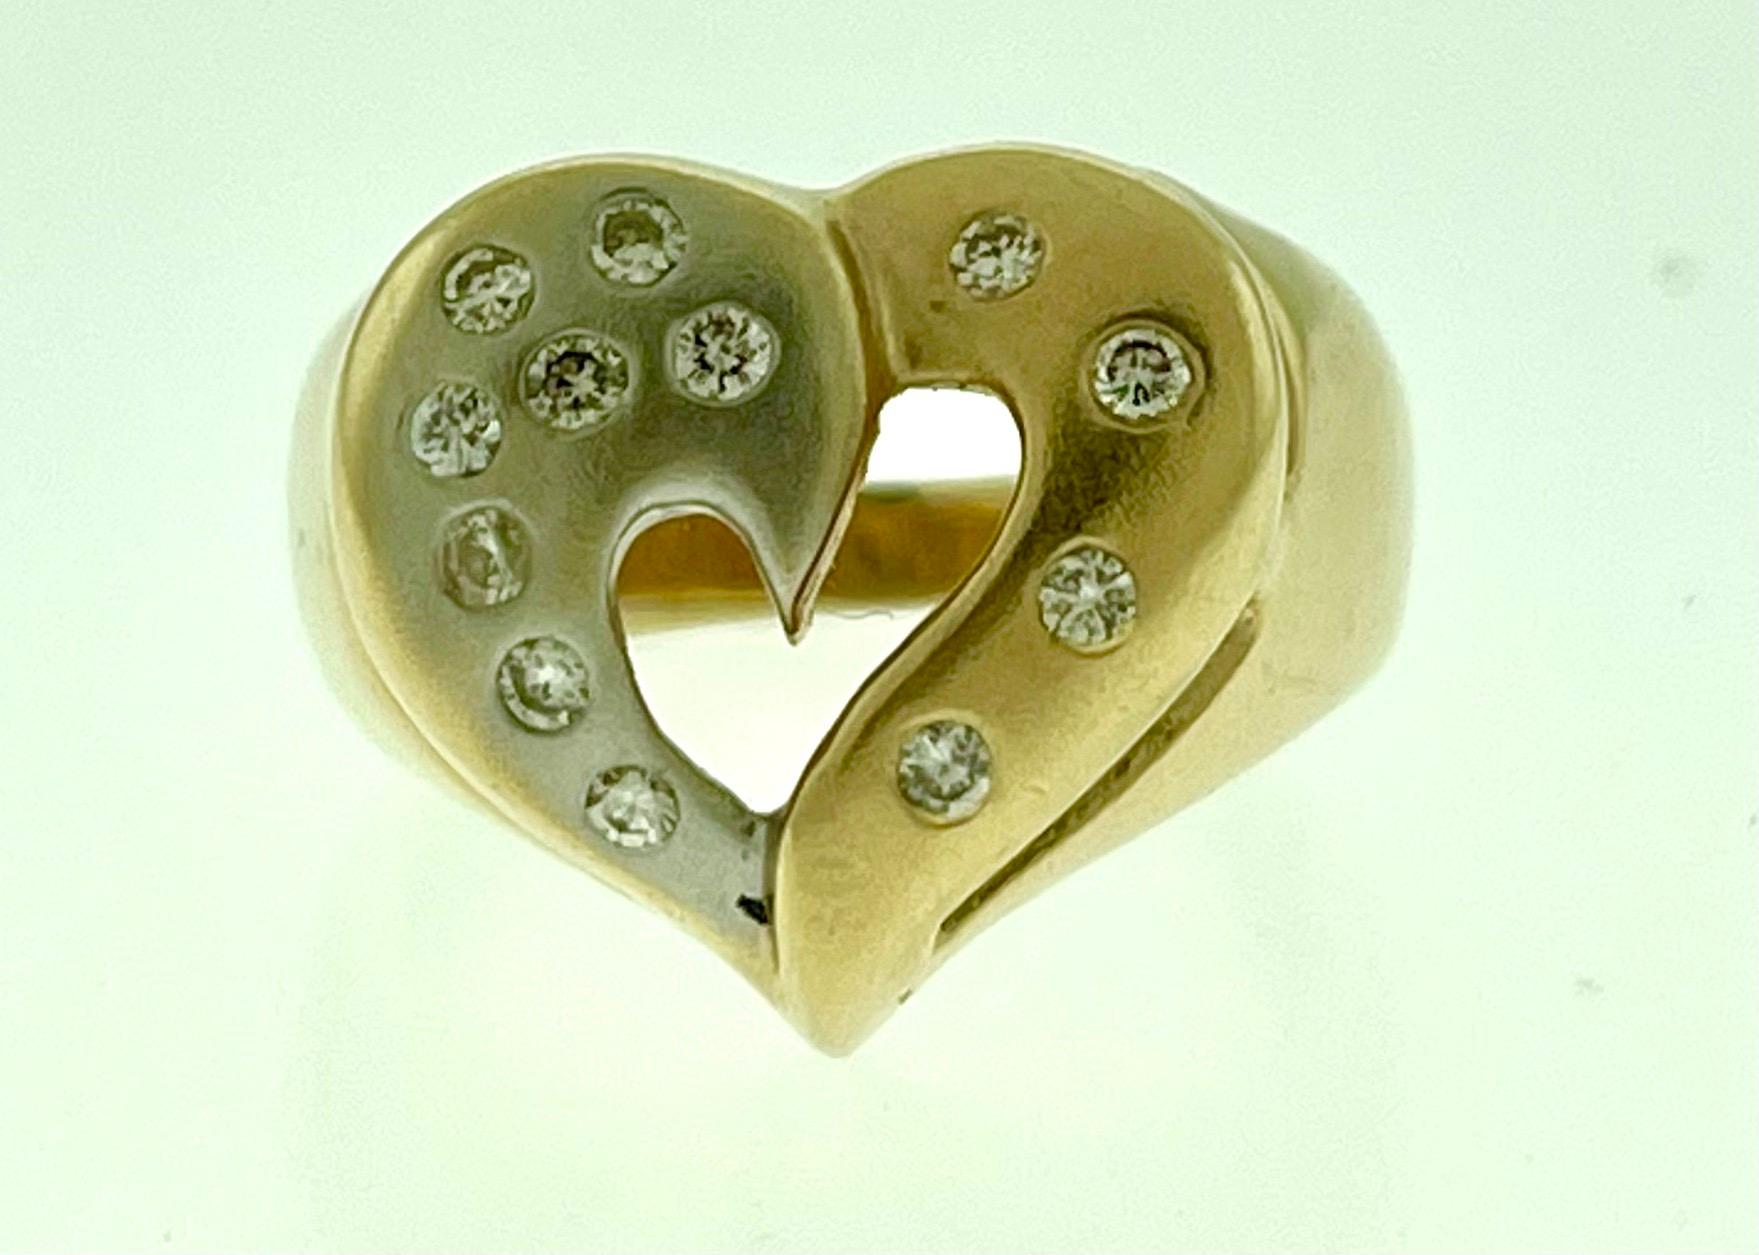 Heart Shape Two Tone Gold Diamond Cocktail 14 Karat Gold Ring Size 5 1/2
14 K gold Stamped 9.0 Grams. 
Diamond Eye clean 
There are brilliant cut Round diamonds in the ring 

Ring size is approximately 5 1/2 but can be altered to any size.
Very